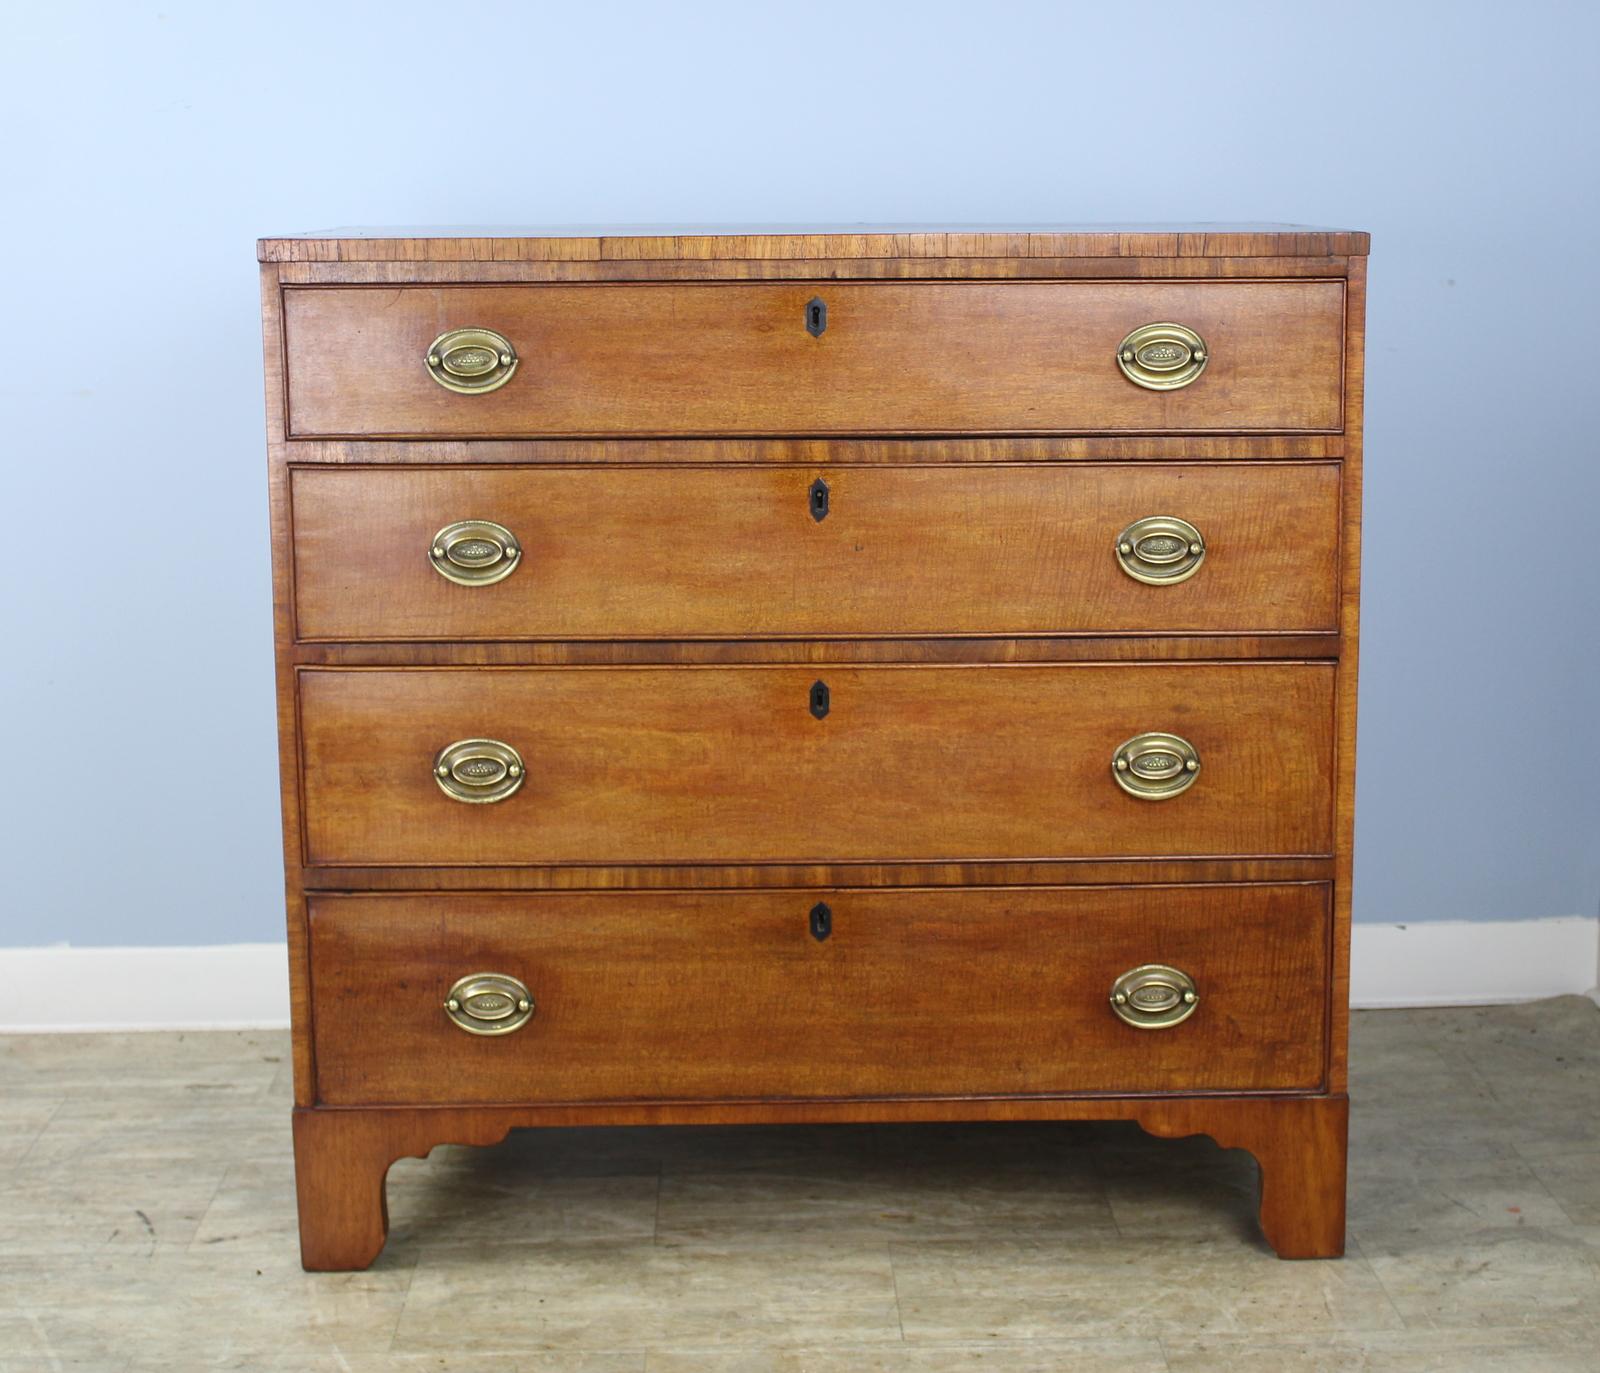 An early and beautifully grained fruitwood chest of drawers with original ogee feet and original inlaid ebony stringing on top. Drawers slide and shut snugly and easily, and are clean inside. Good golden honey colored fruitwood.